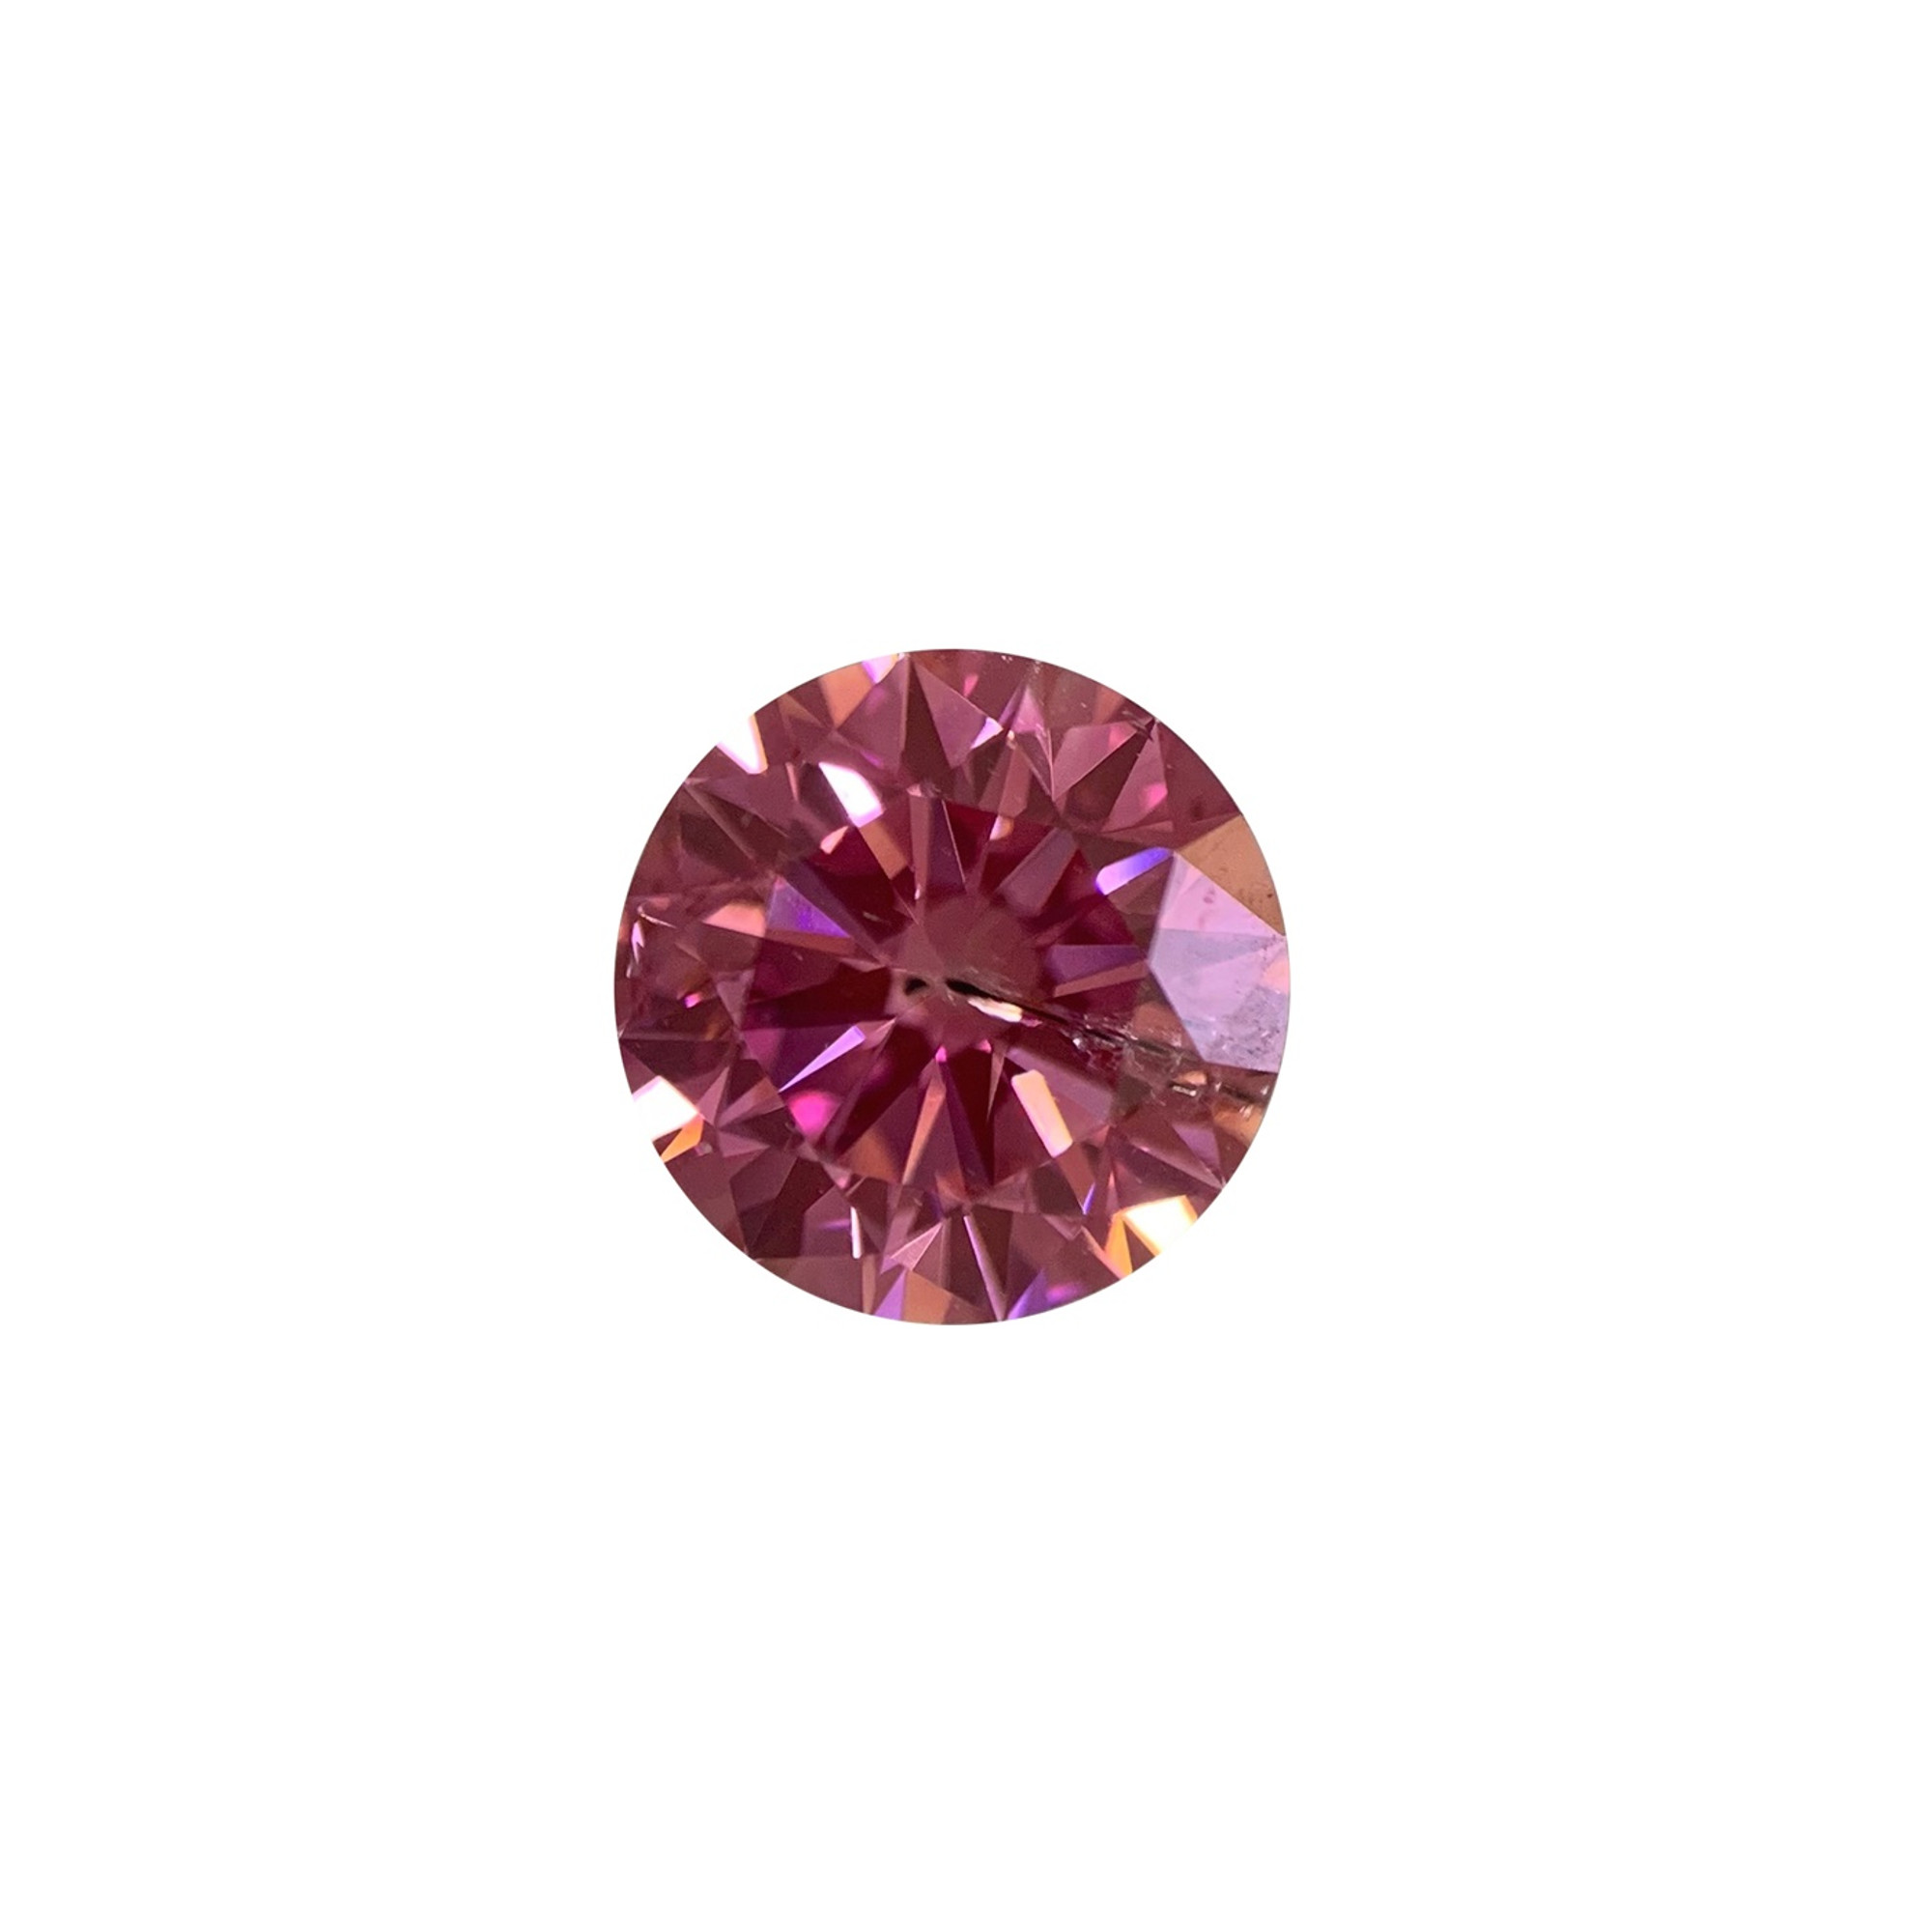 Gorgeous 1ct (.99ct) Heart Shaped Fancy Pink Lab Grown Diamond